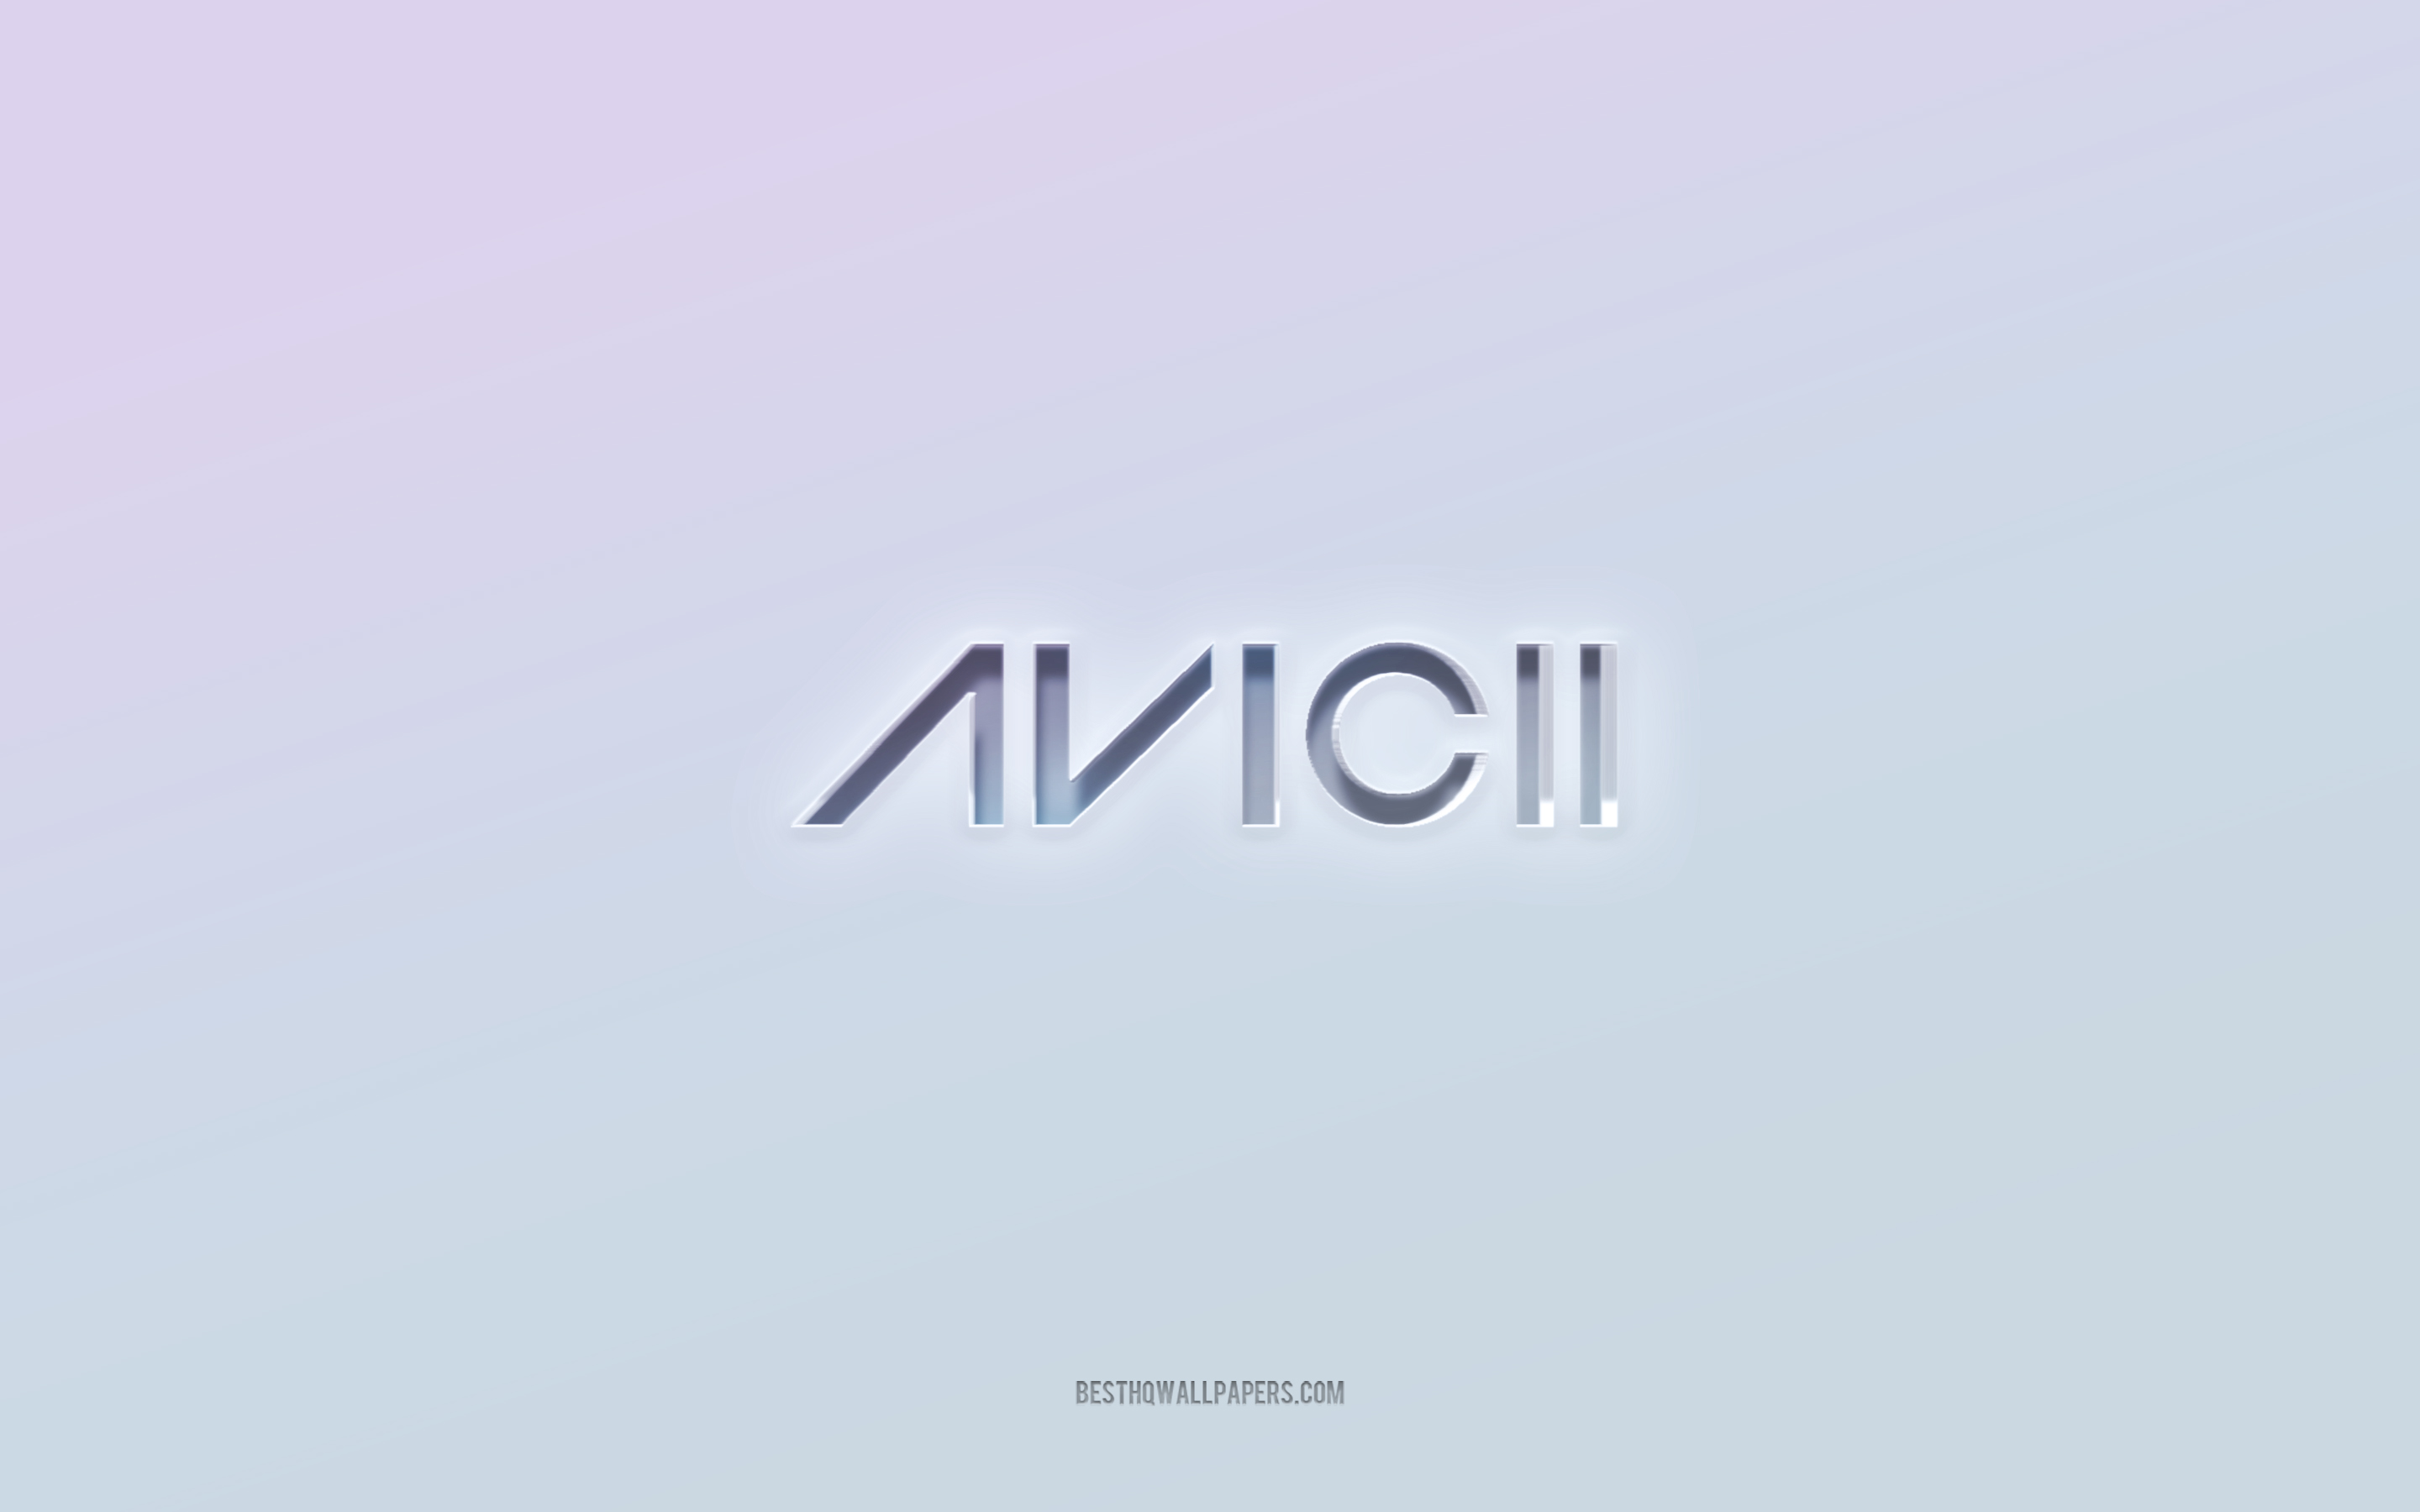 Download wallpapers Avicii logo, cut out 3d text, white background ...